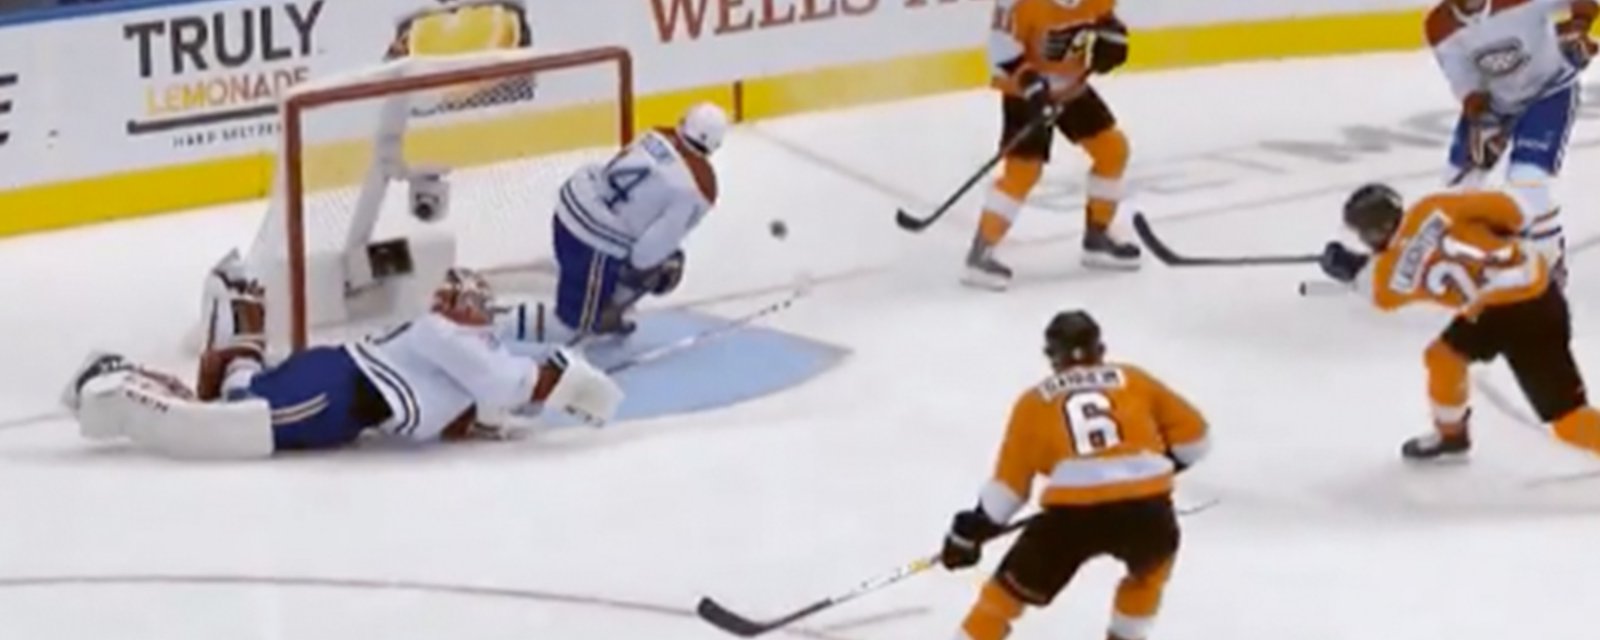 Down and out Price makes an insane diving stick save